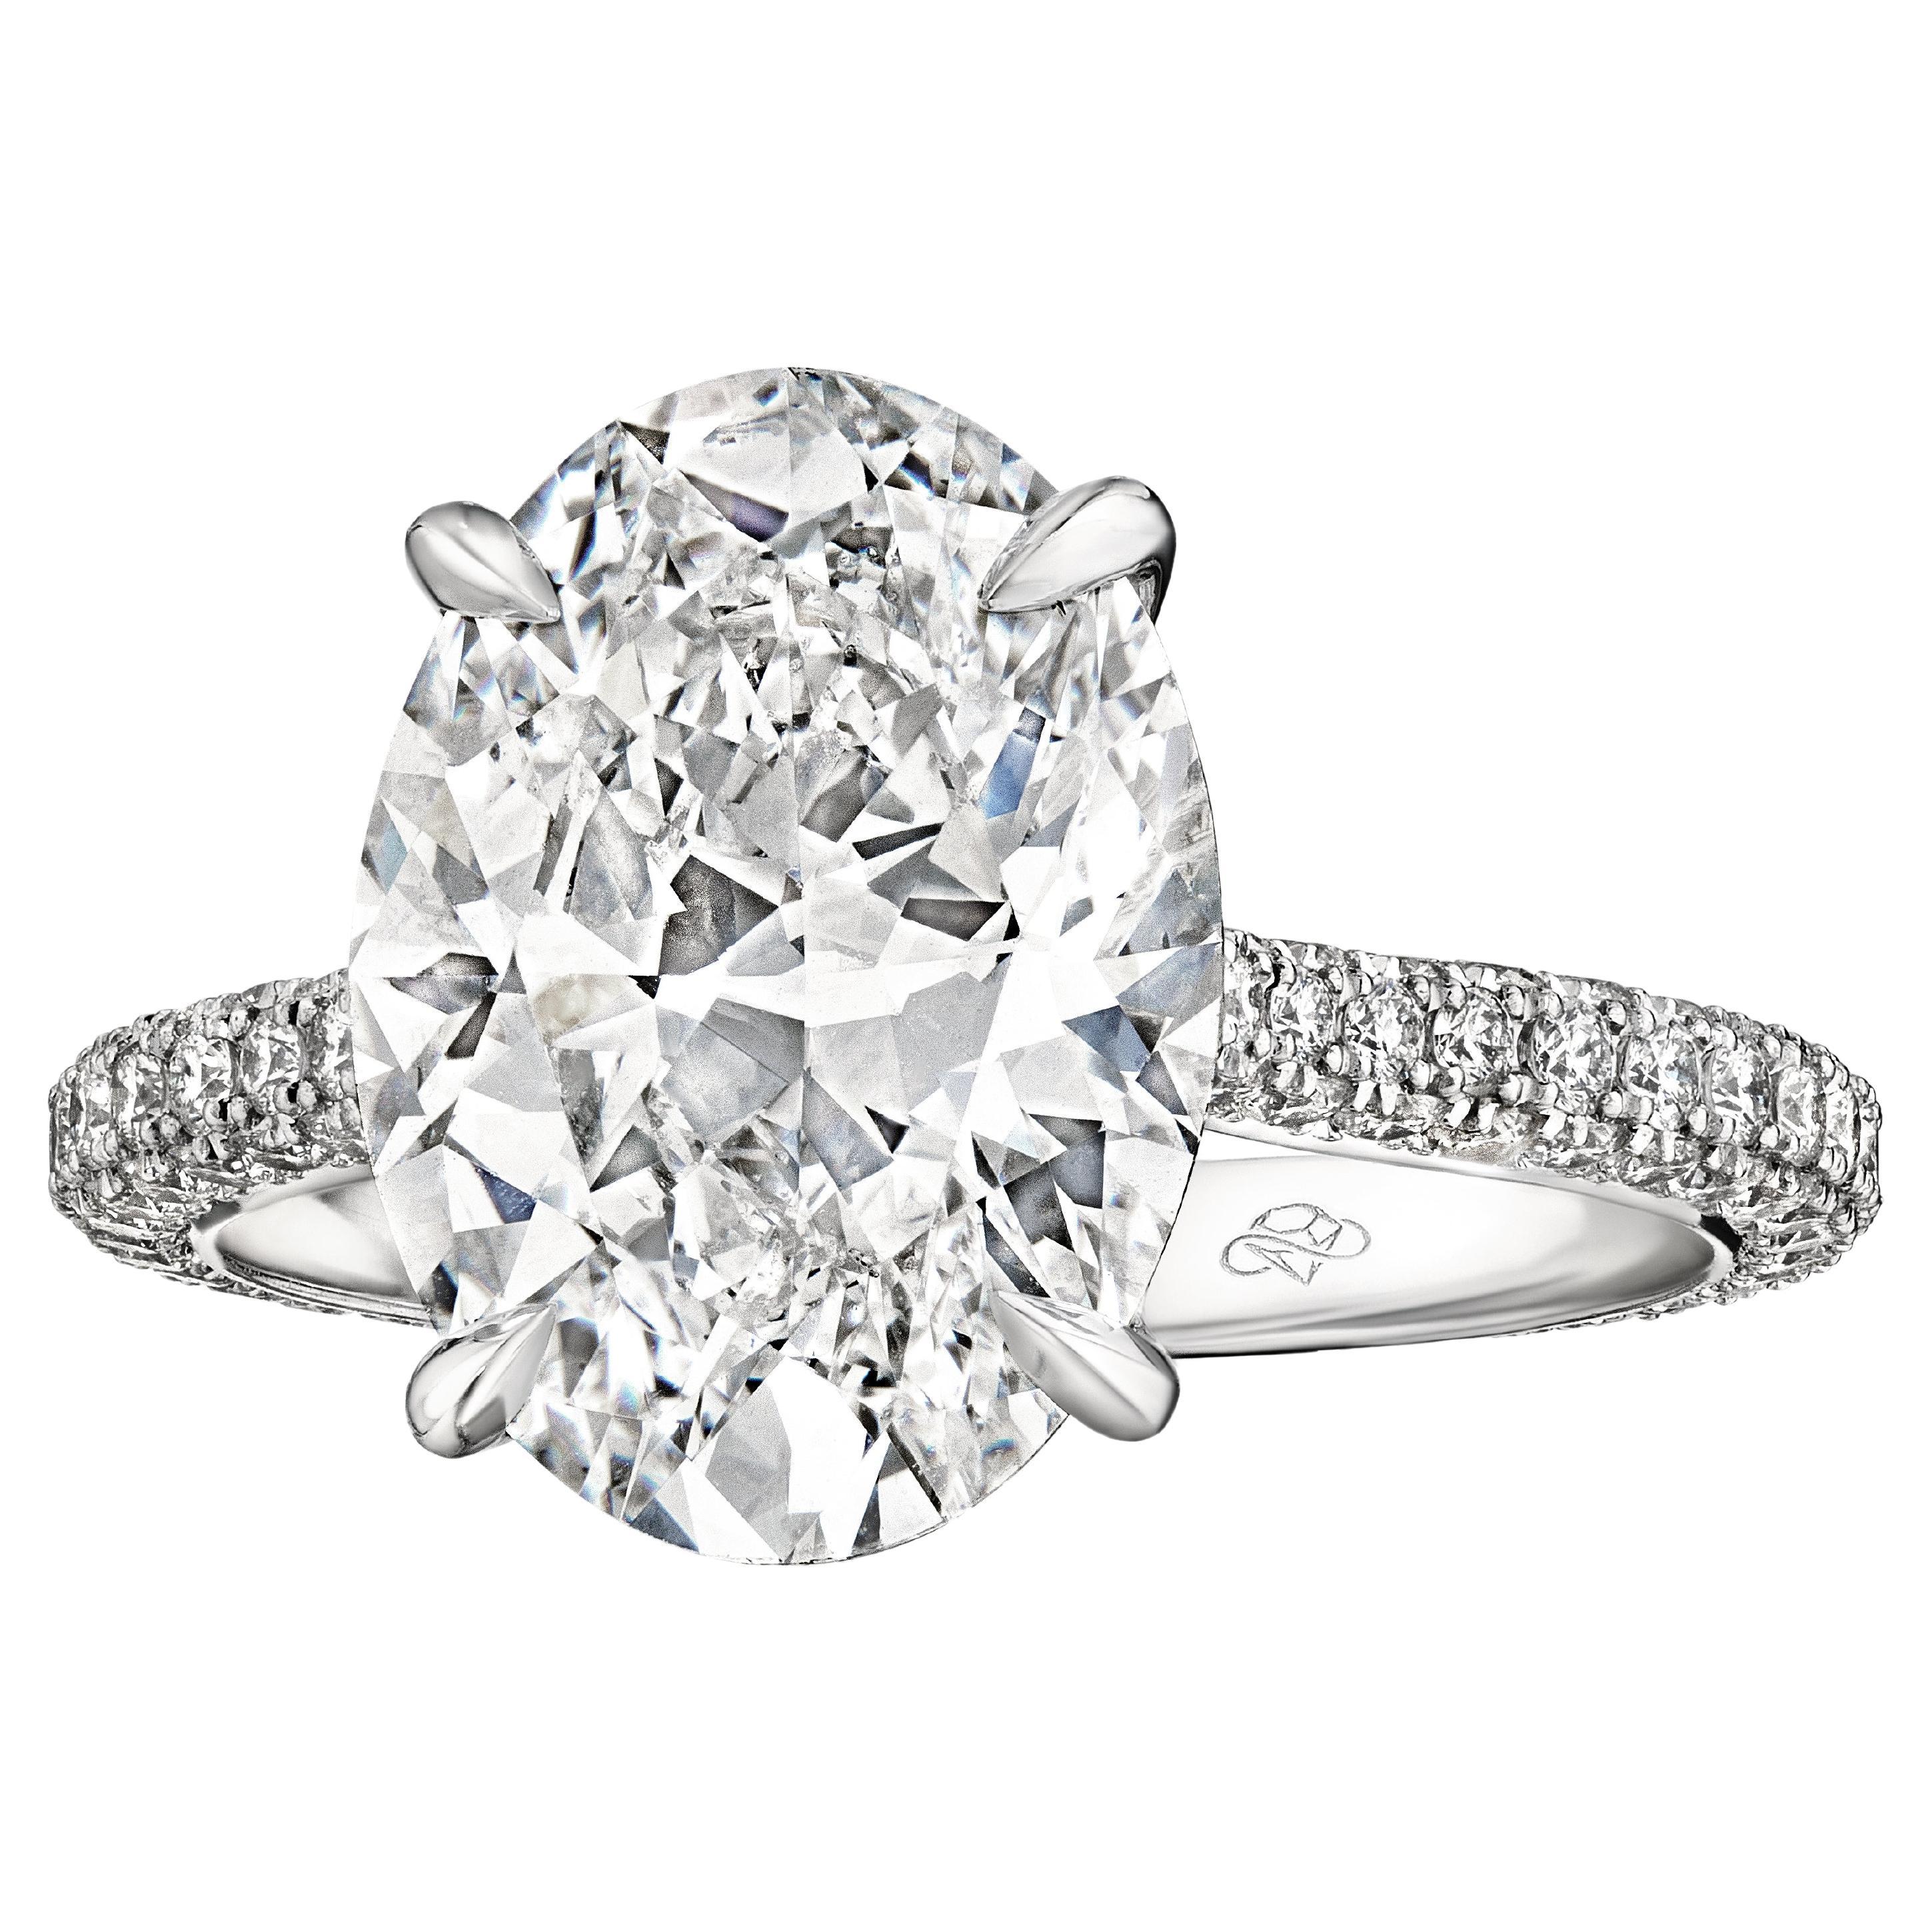 GIA Certified 4 Carat E VS2 Oval Diamond Engagement Ring "Alexandria" For Sale